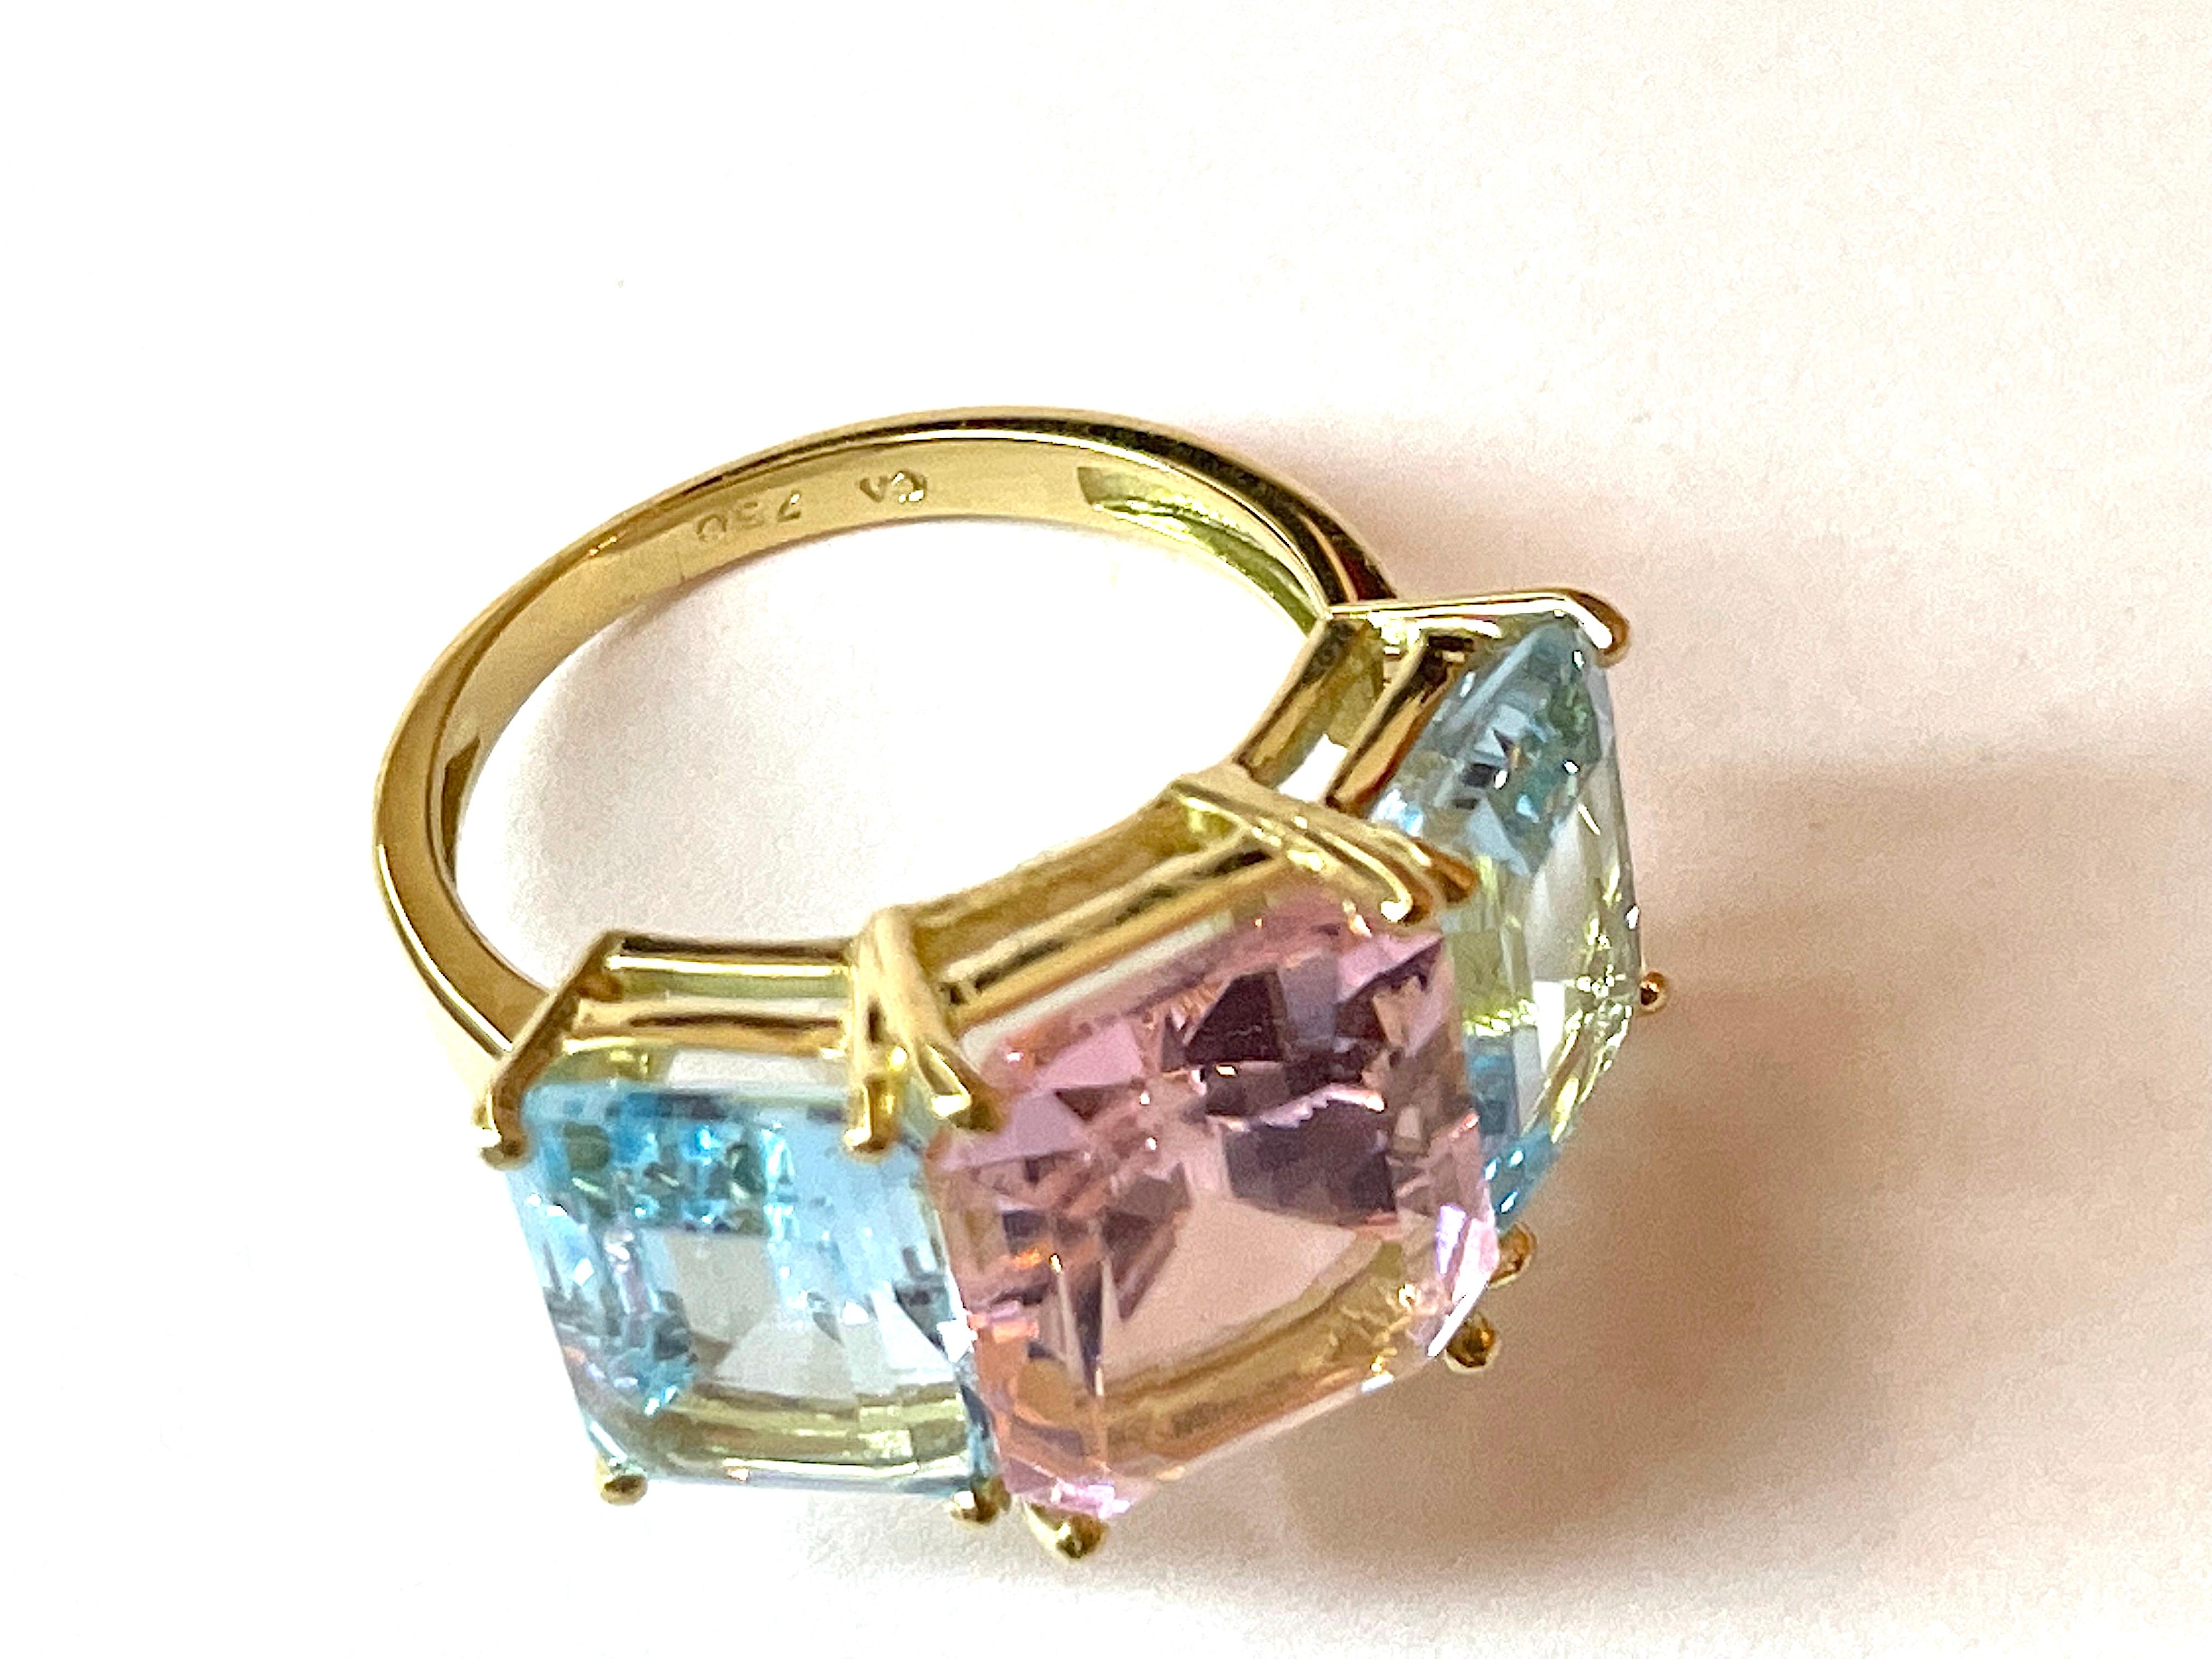 18kt Yellow Gold Emerald Cut Ring with Pink Topaz and Blue Topaz For Sale 3